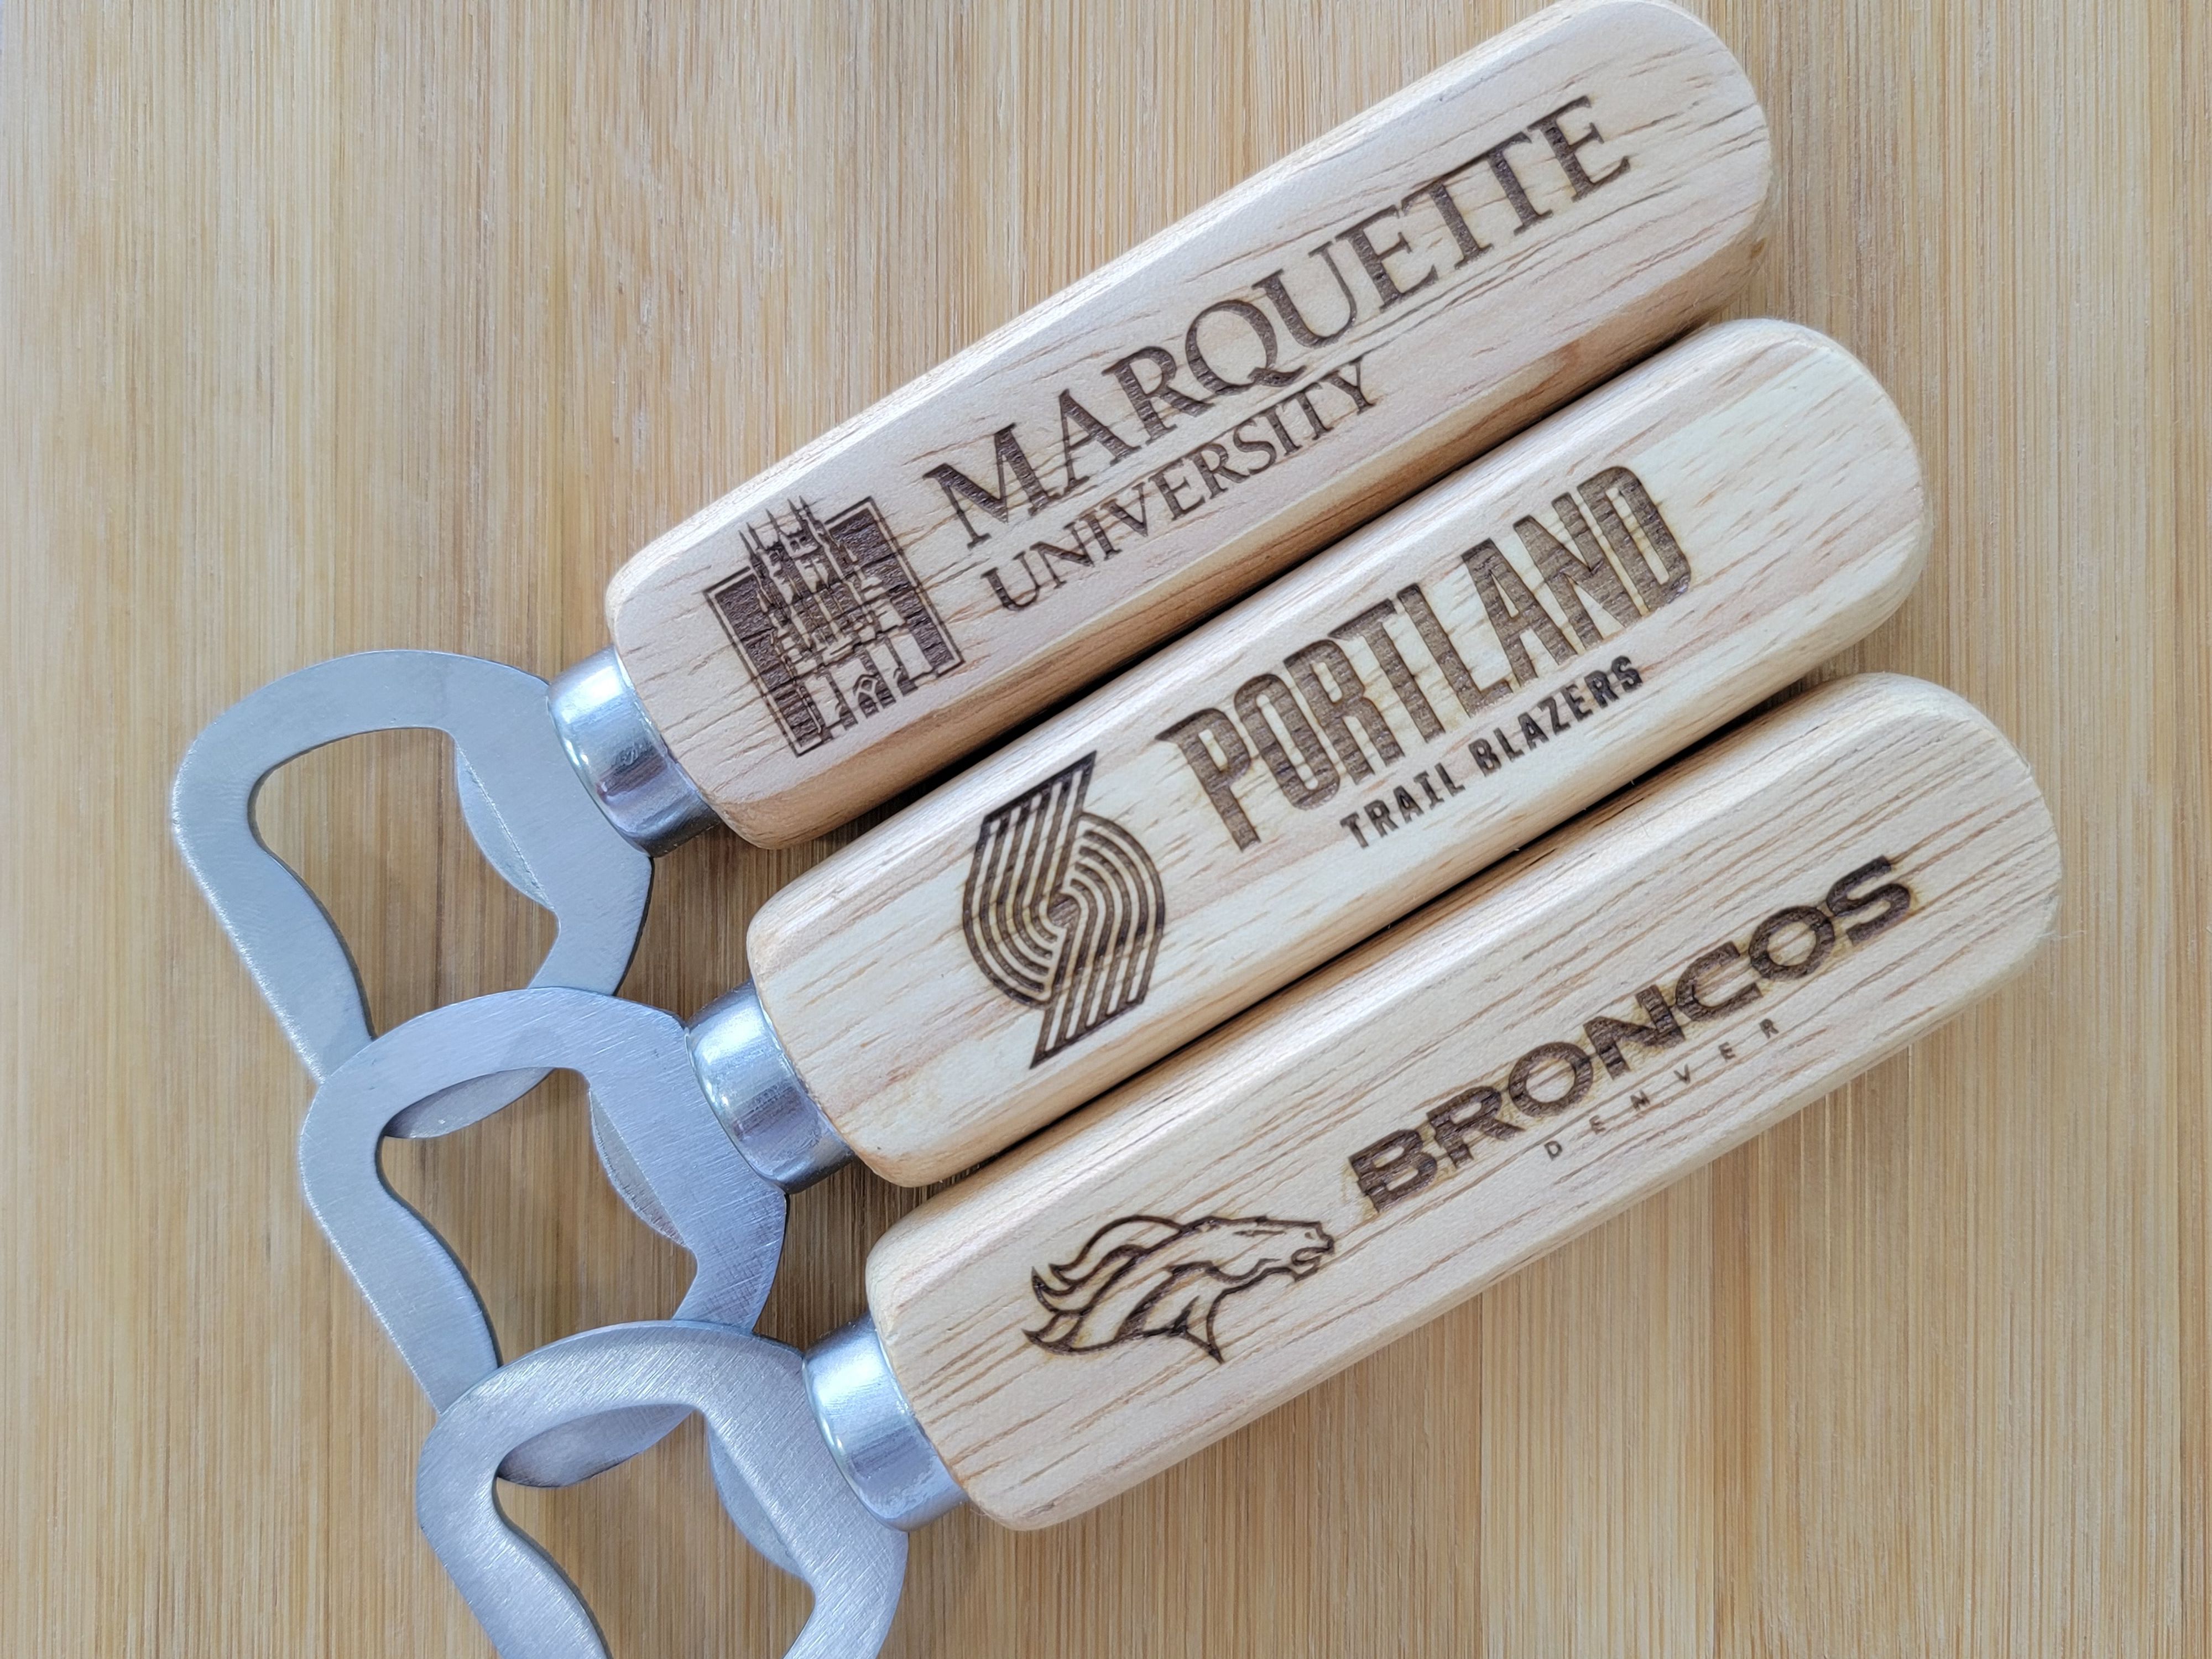 Bottle Openers for gifts